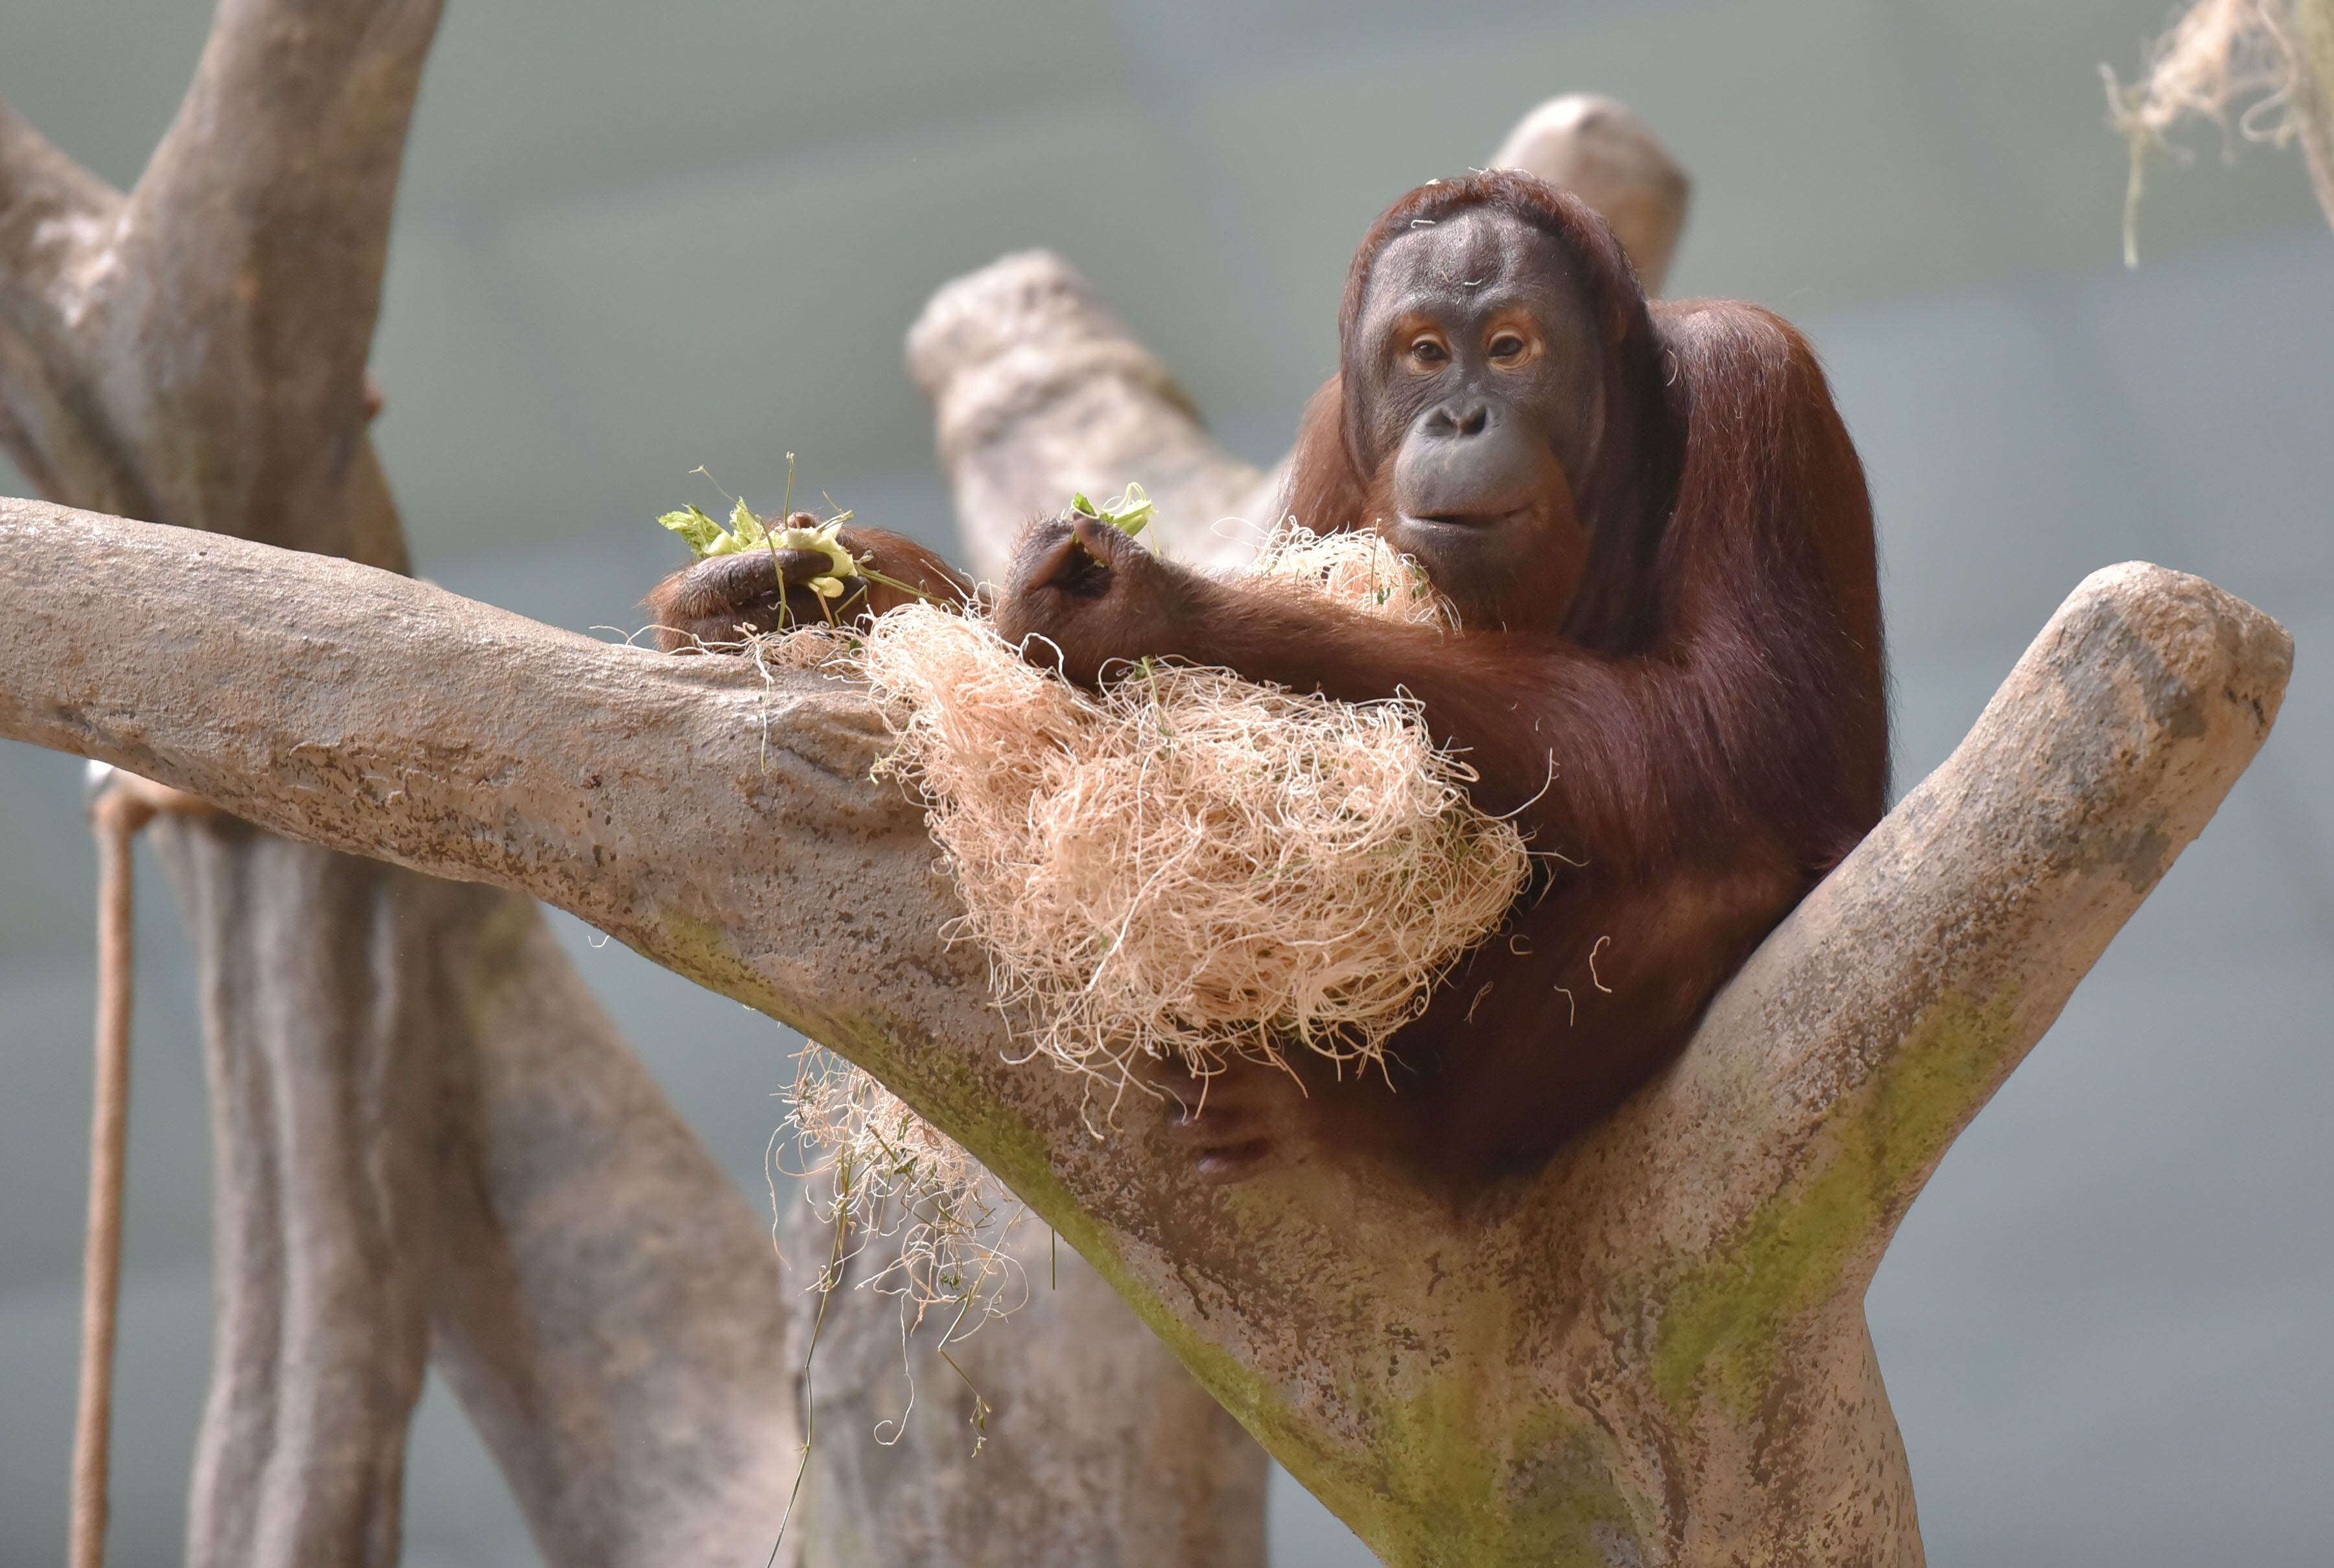 A new primate habitat is being built at the Brookfield Zoo. Gorillas, orangutans and other monkeys will have a new 2-acre, indoor/outdoor living space.